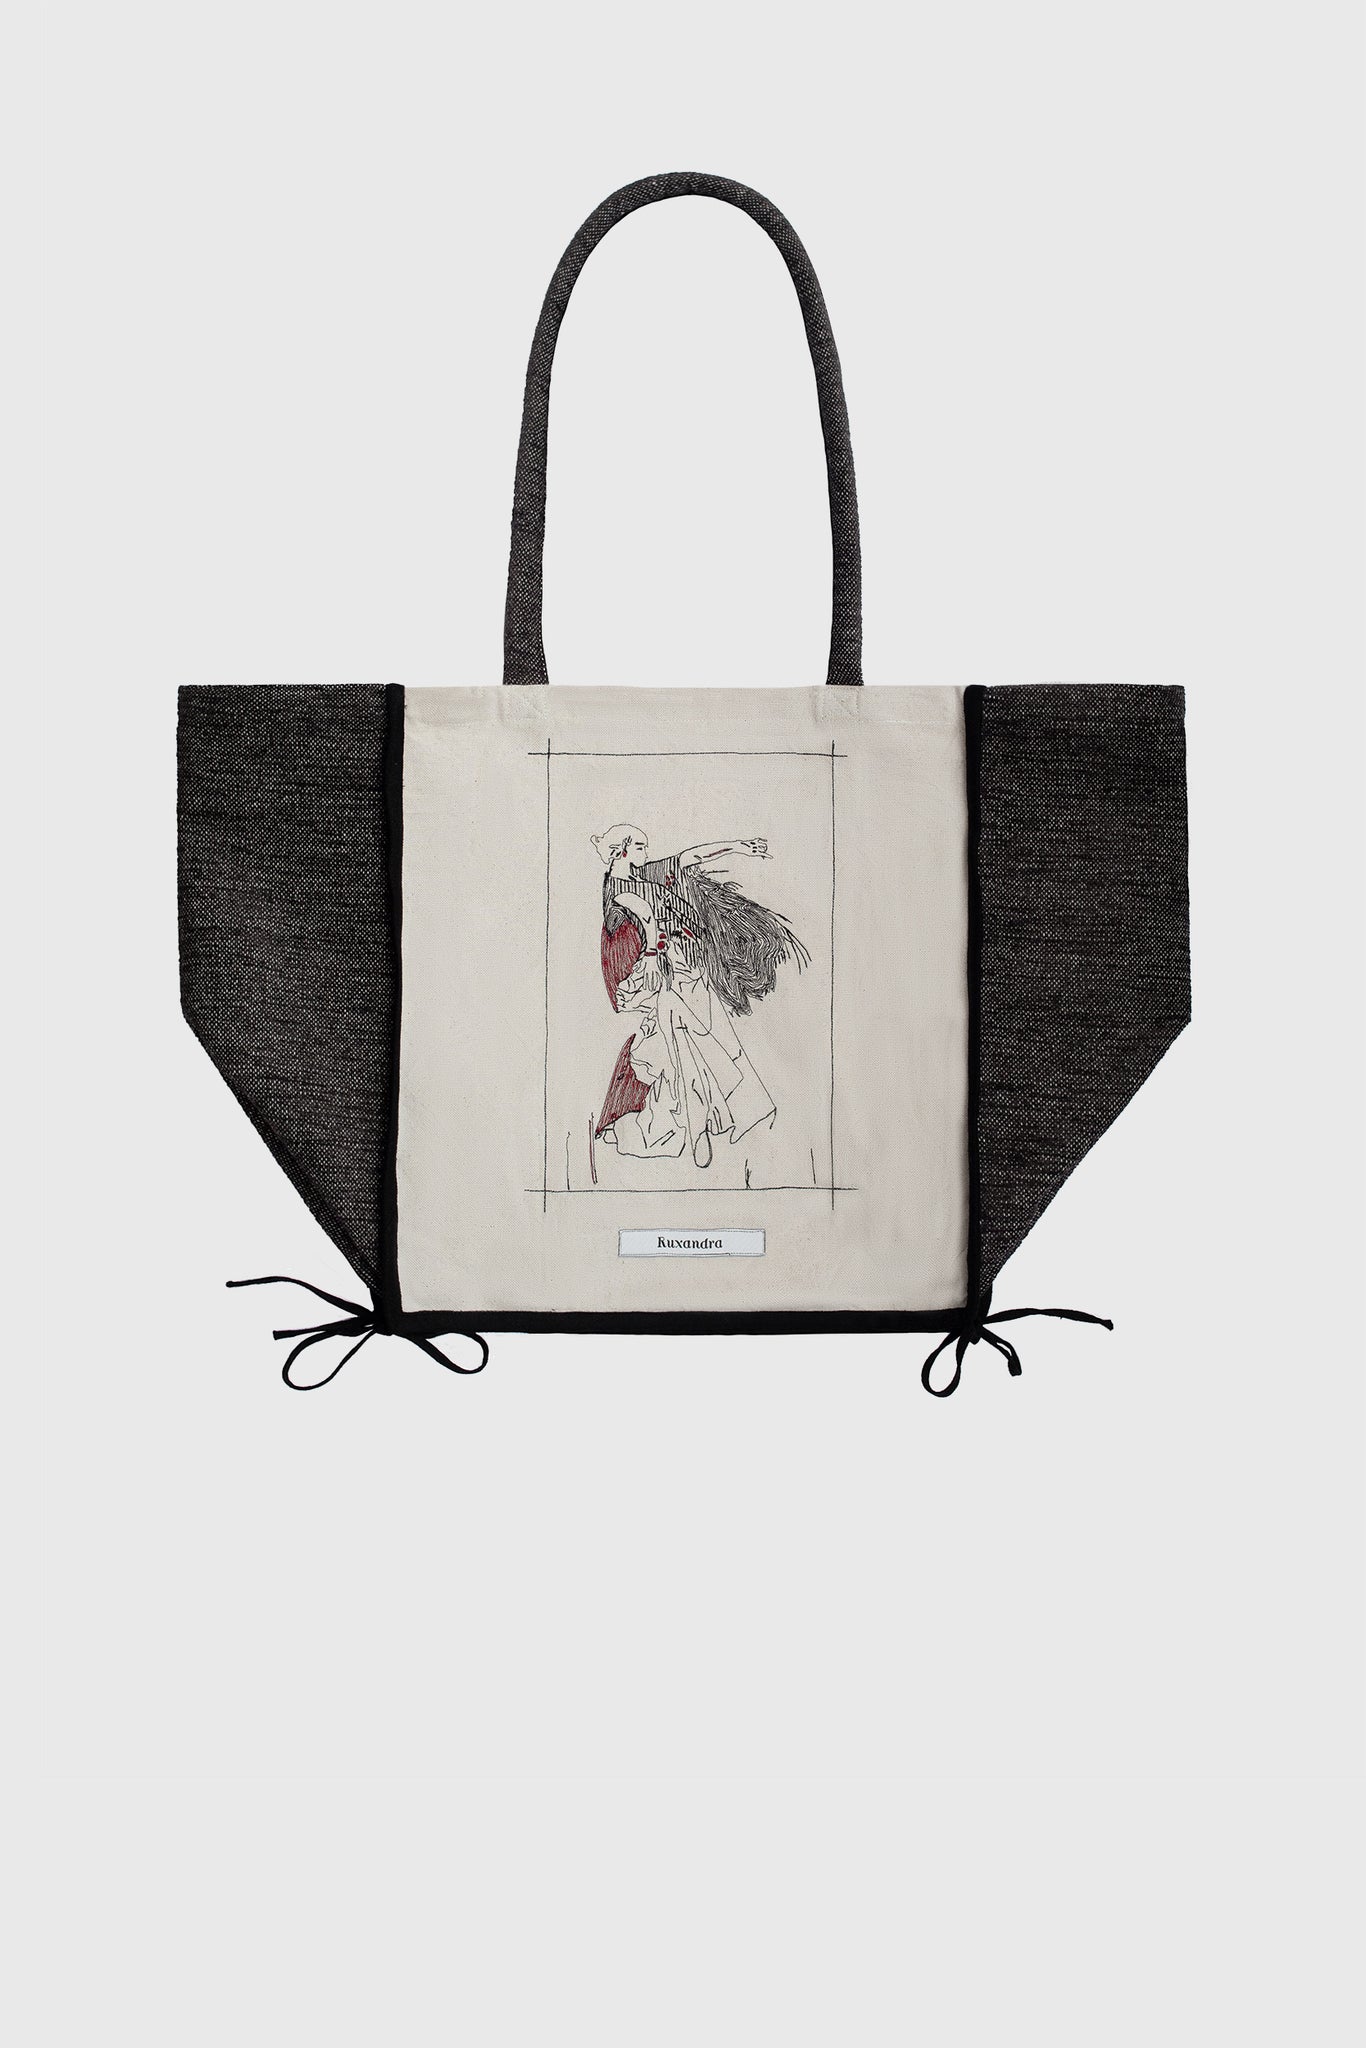 Ruxandra beautiful tote bag, with a manual embroidery of a Spanish Flamenco dancer, with red shawl and hand in the air, work of art, painting by John Singer Sargent, the Met, round handles, capacious cotton bag, black butter white and burgundy red colors, graphic and attractive